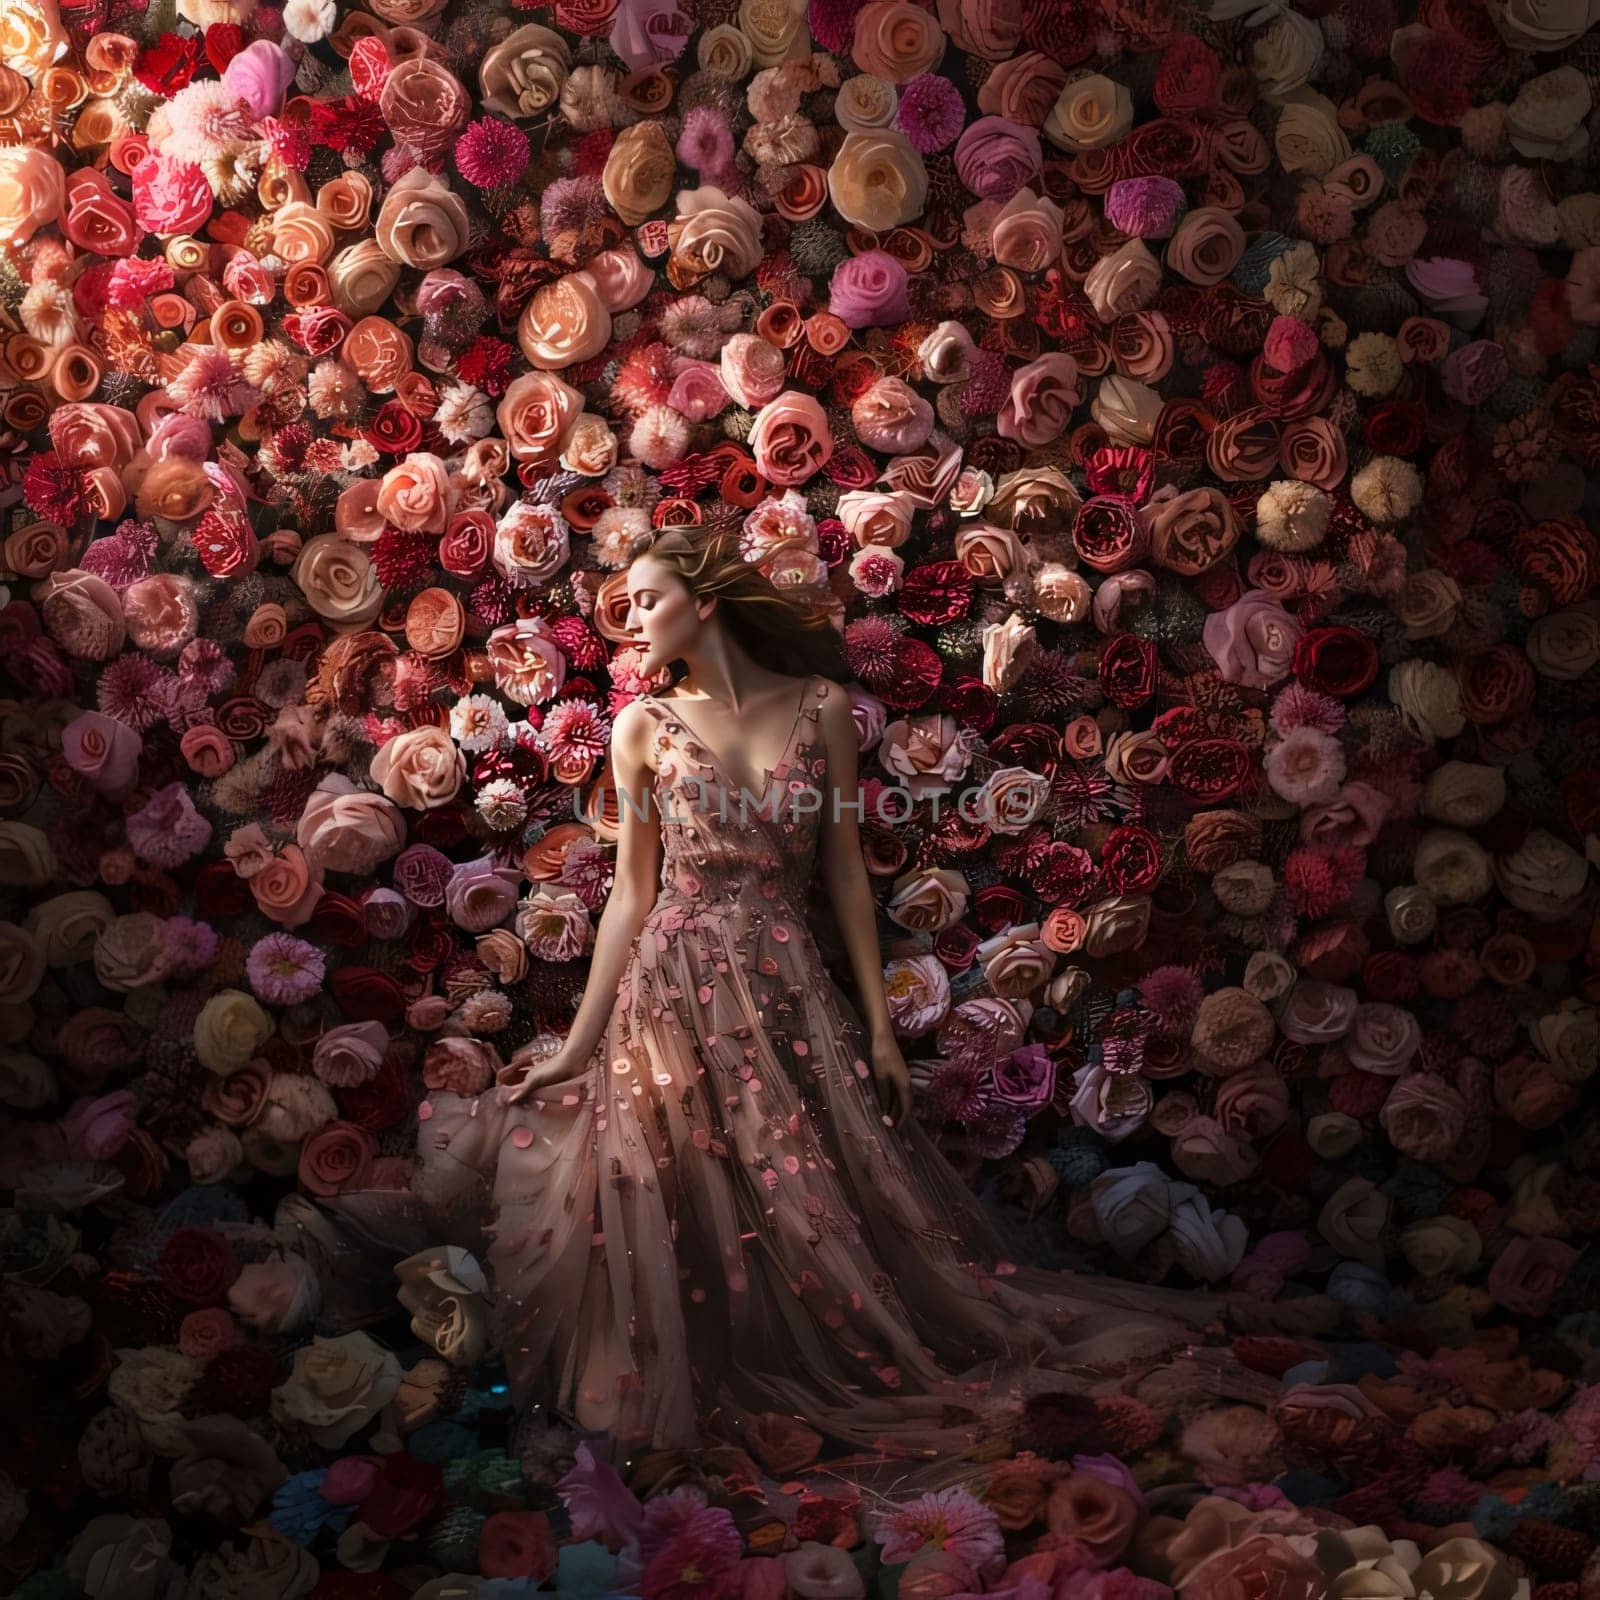 A young woman in a red and pink dress against a wall of red pink roses. Flowering flowers, a symbol of spring, new life. A joyful time of nature waking up to life.